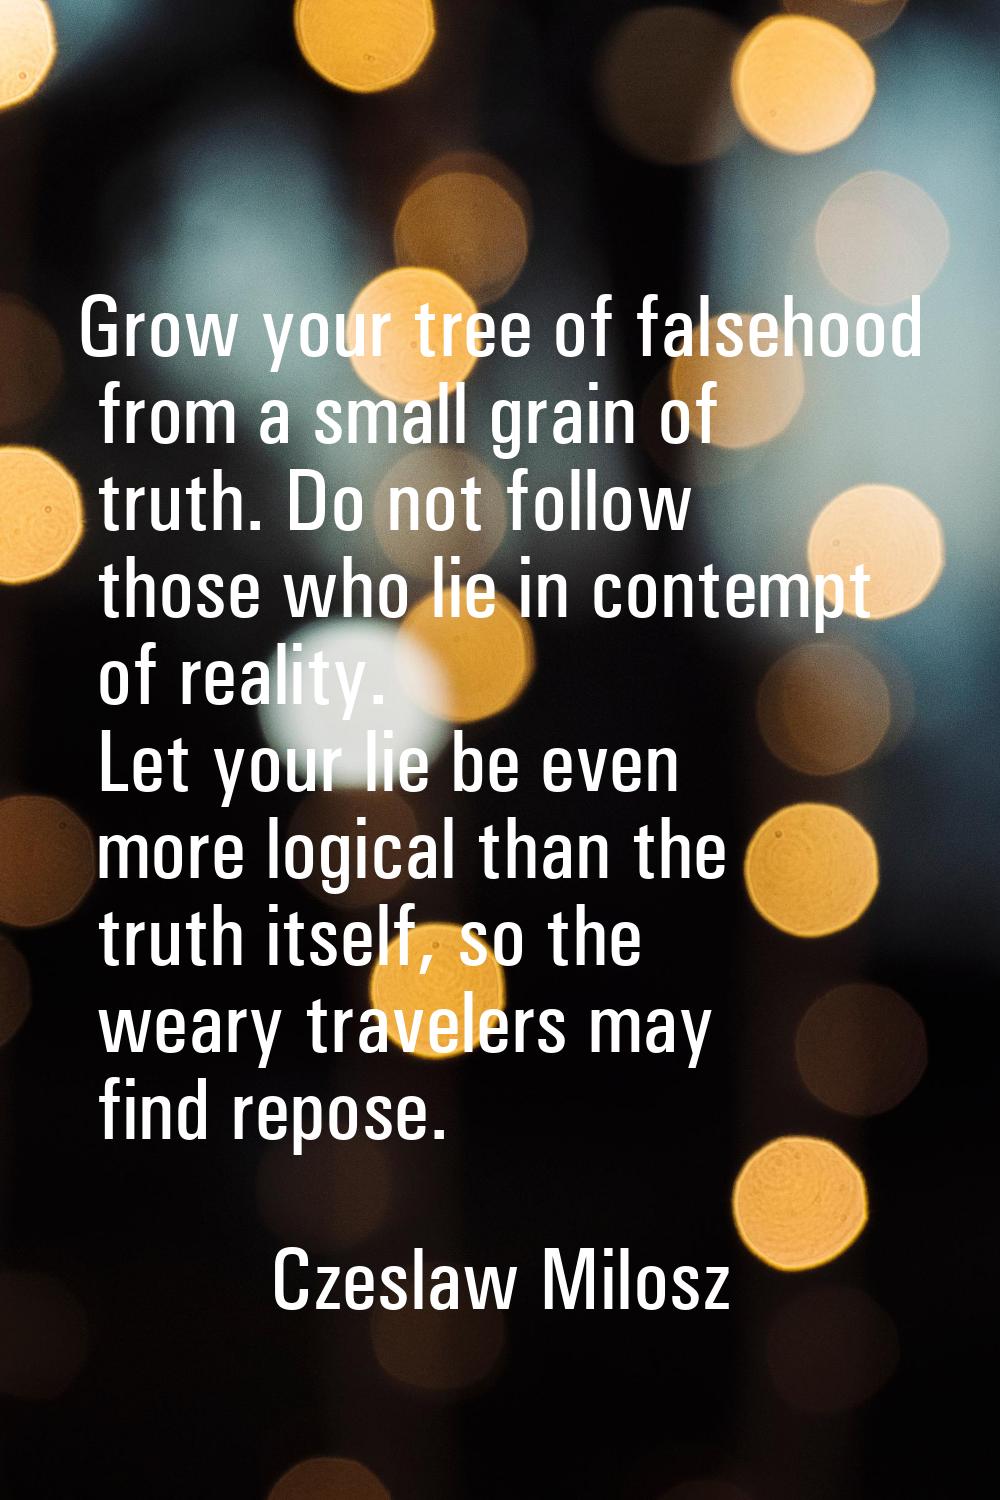 Grow your tree of falsehood from a small grain of truth. Do not follow those who lie in contempt of